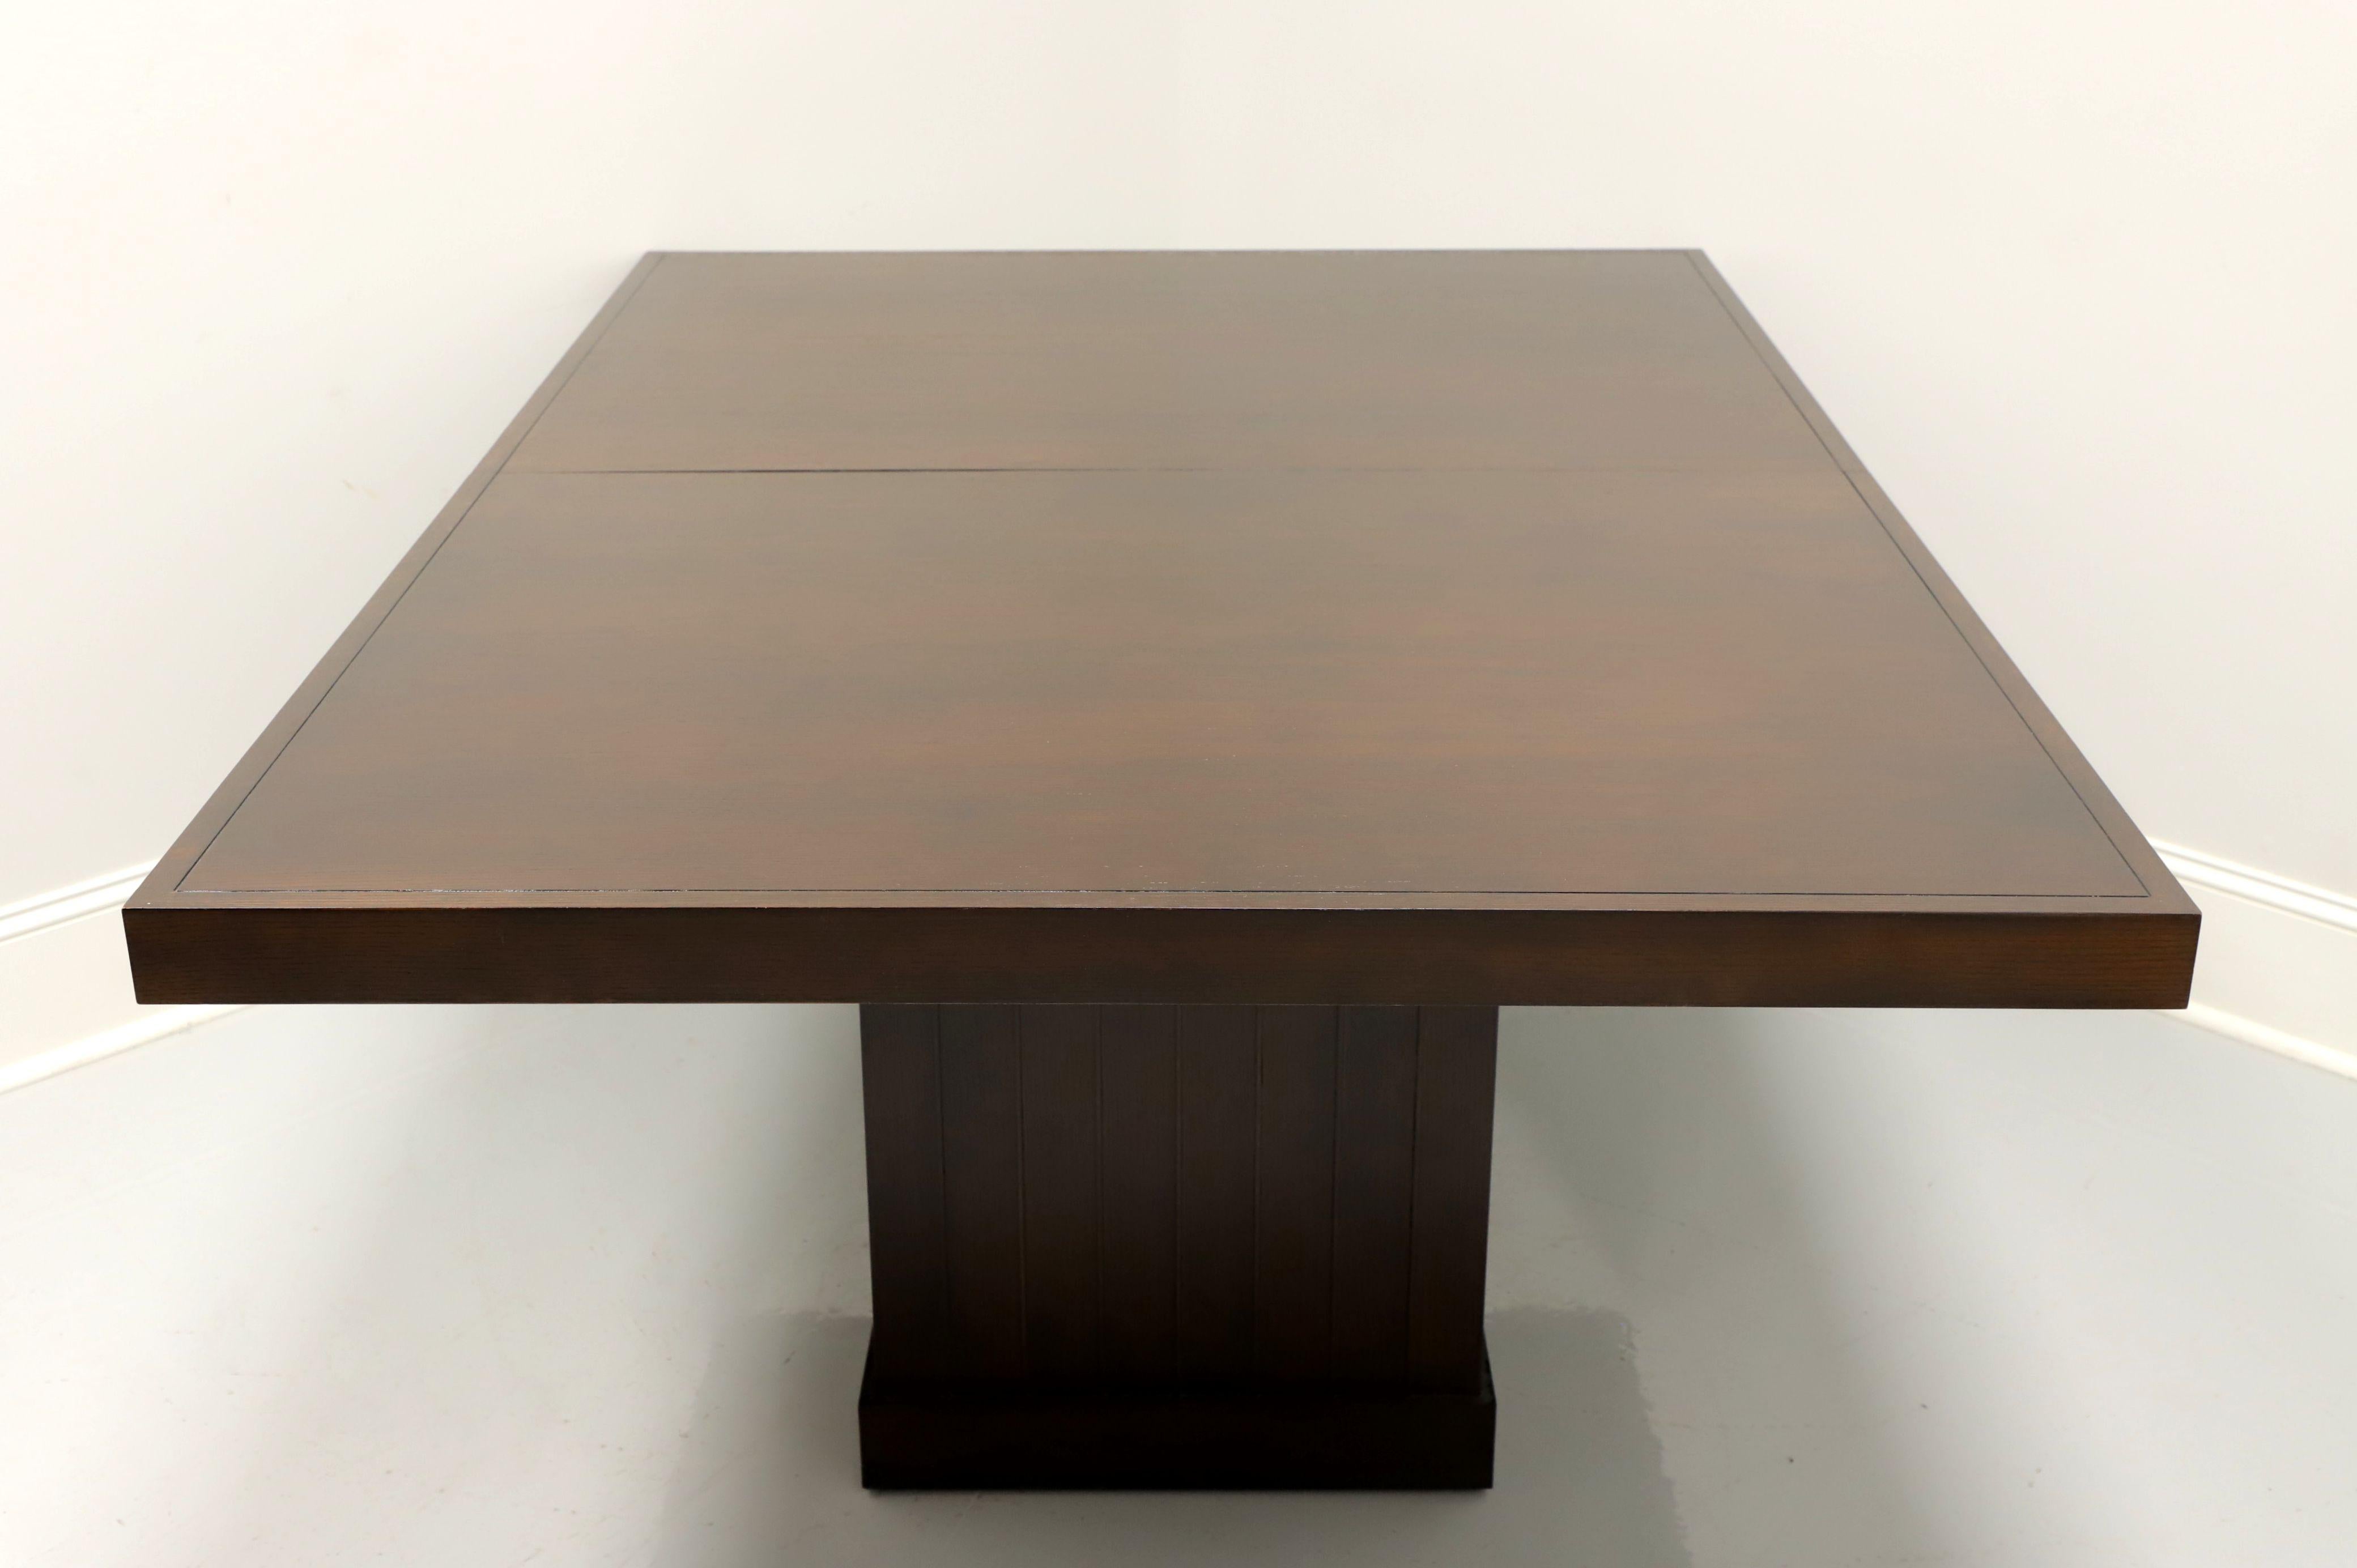 A Contemporary style rectangular dining table by Barbara Barry for Baker Furniture. Solid mahogany, having an architectural nod with a rectangular top, board banding/apron and a solid rectangular pedestal base with the look of slats and a baseboard.